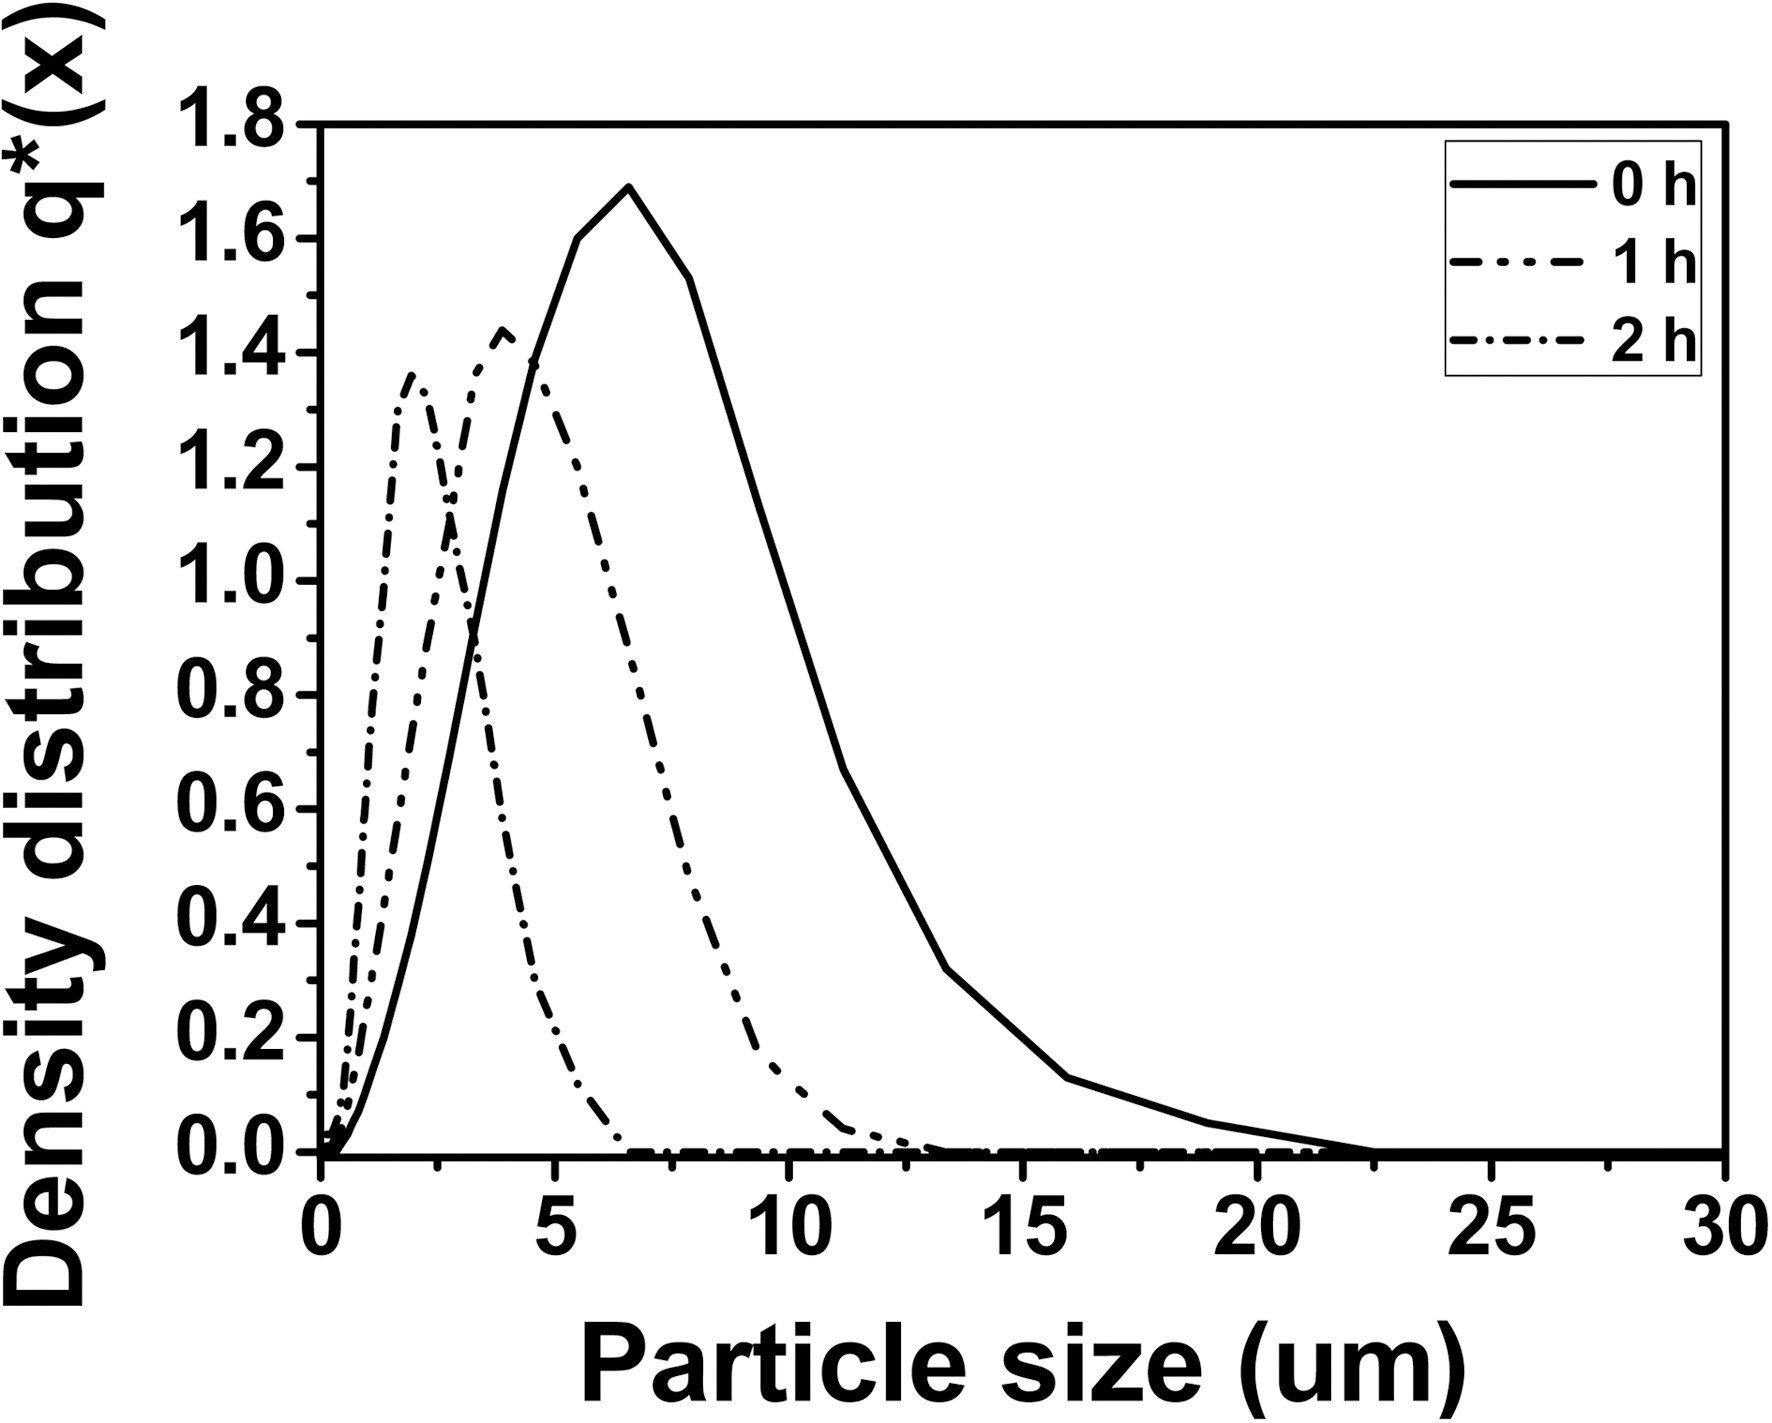 Quantitative analysis of the particle size distribution of physically modified illites with different treatment times.